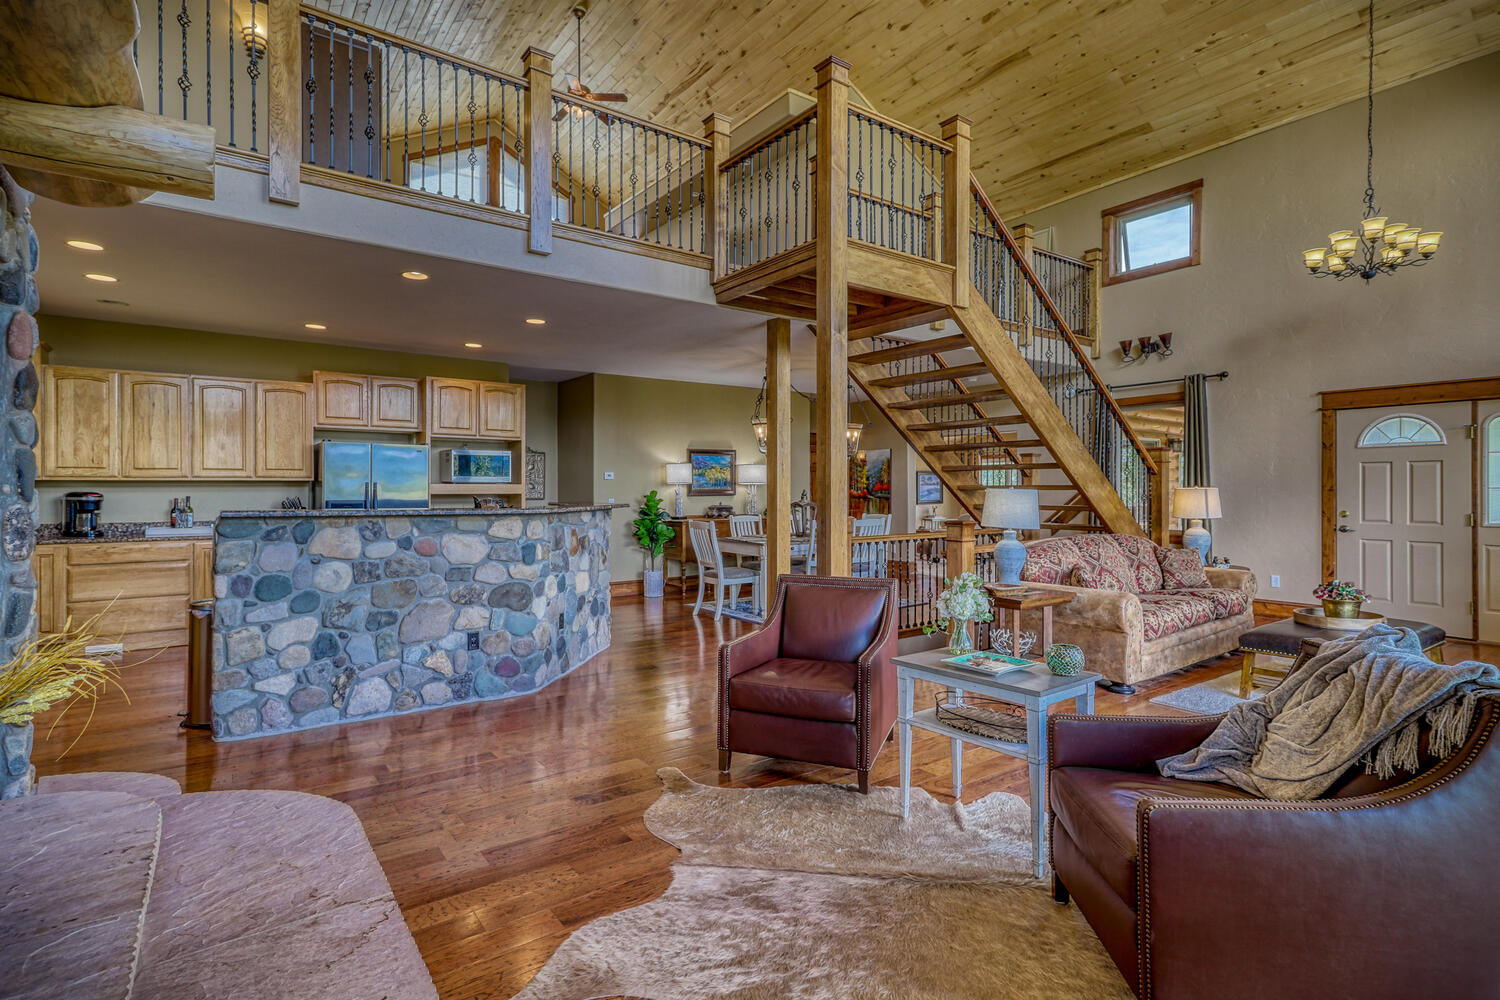 Main living area, showing kitchen and loft areas of Eagle's View vacation rental home by A River Runs Thru It